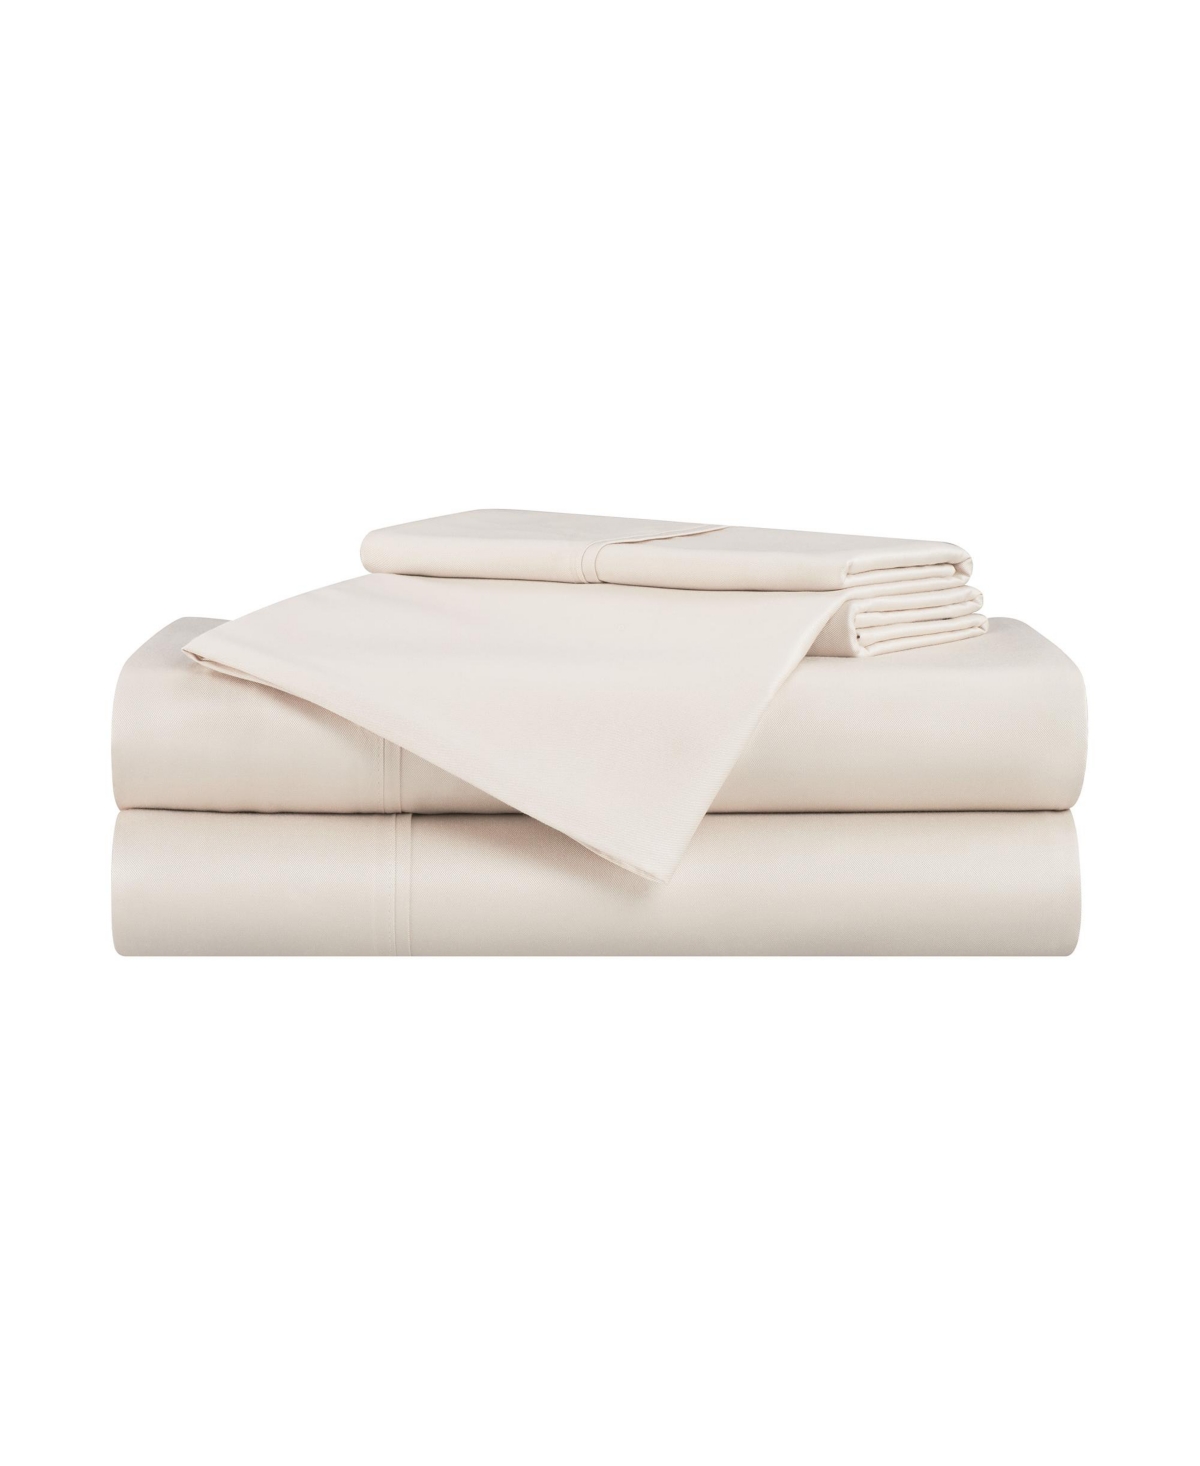 Aston And Arden Rayon From Bamboo King Sheet Set, Ultra Silky Luxury Sheets, 1 Flat Sheet, 1 Fitted Sheet, 2 Pillowc In Tan